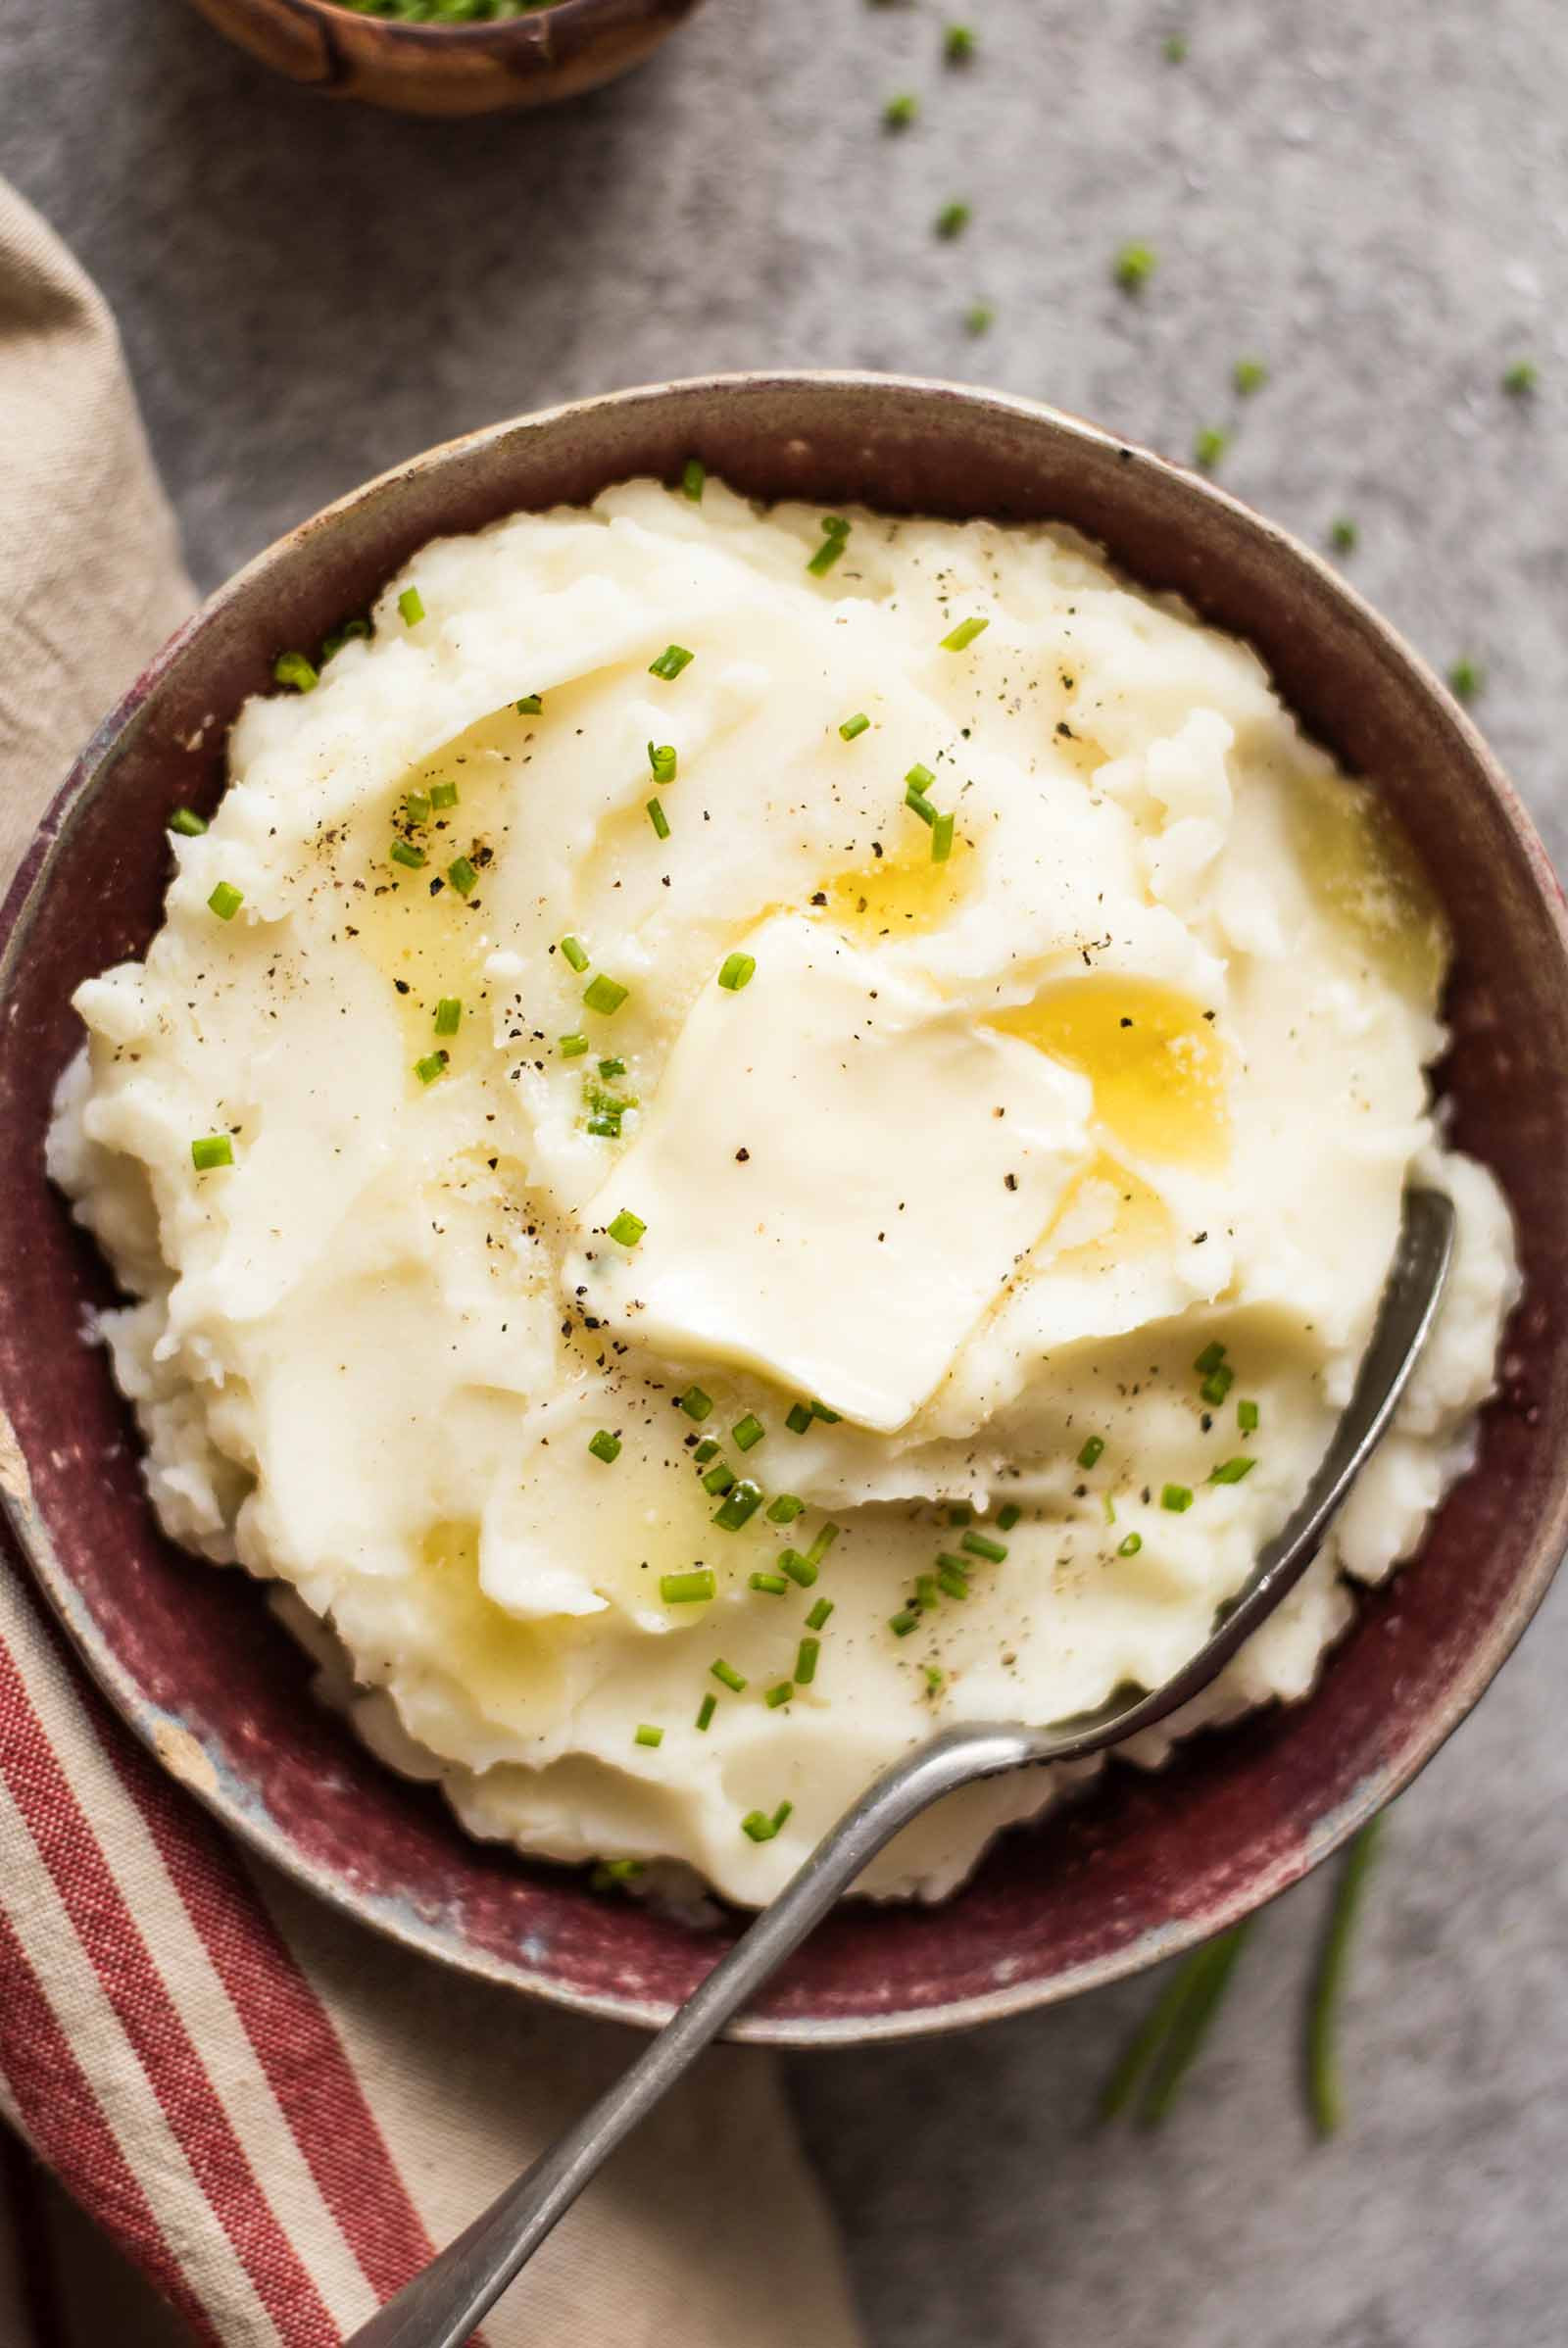 Best Mashed Potatoes For Thanksgiving
 Crock Pot Mashed Potatoes Easy & No Stress